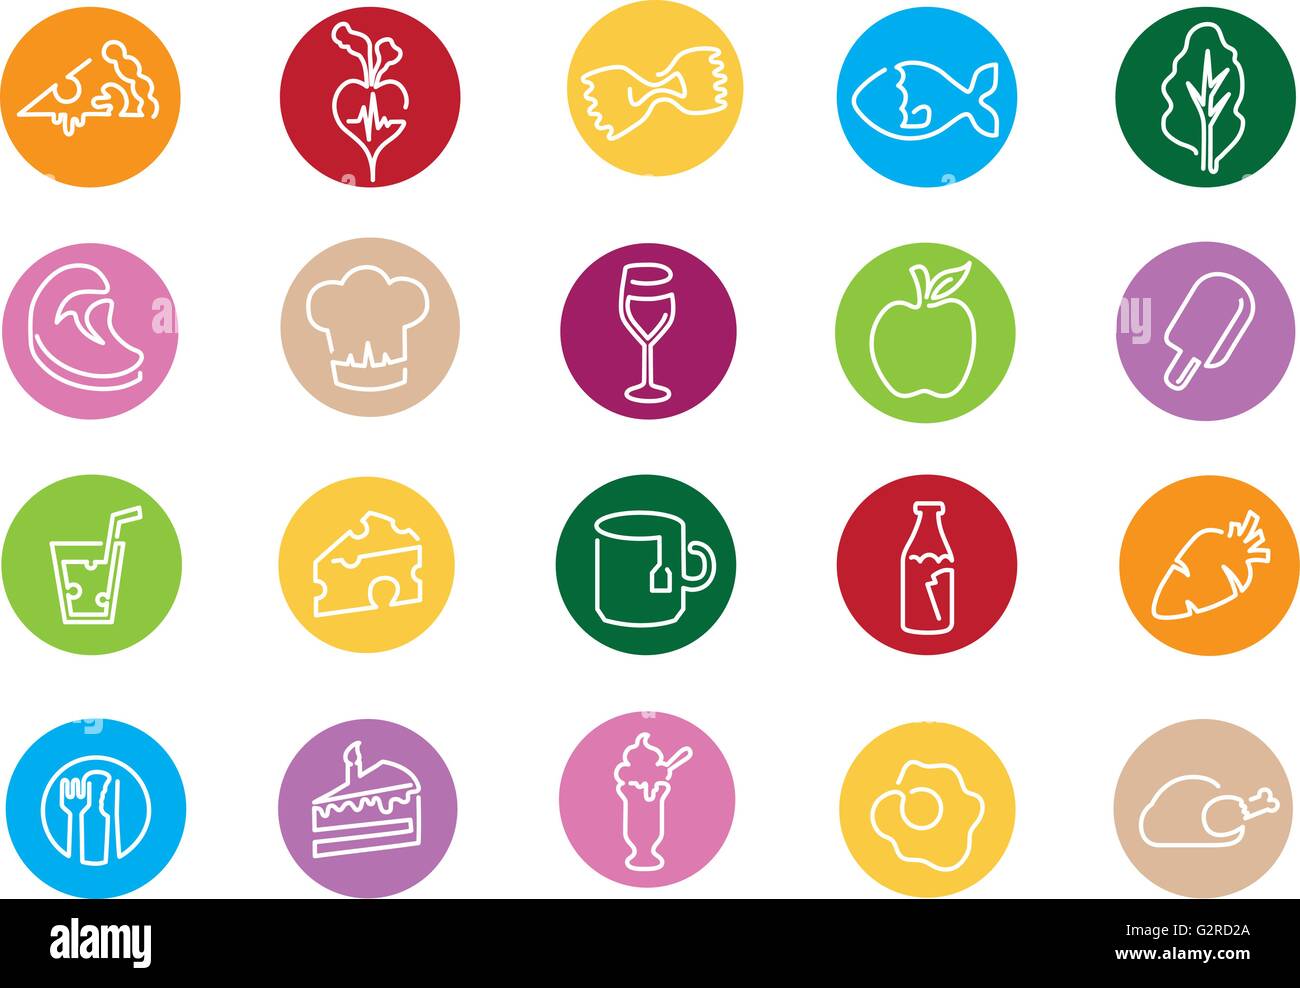 Illustration Of Icons Related To Food, Drink And Diet Stock Vector